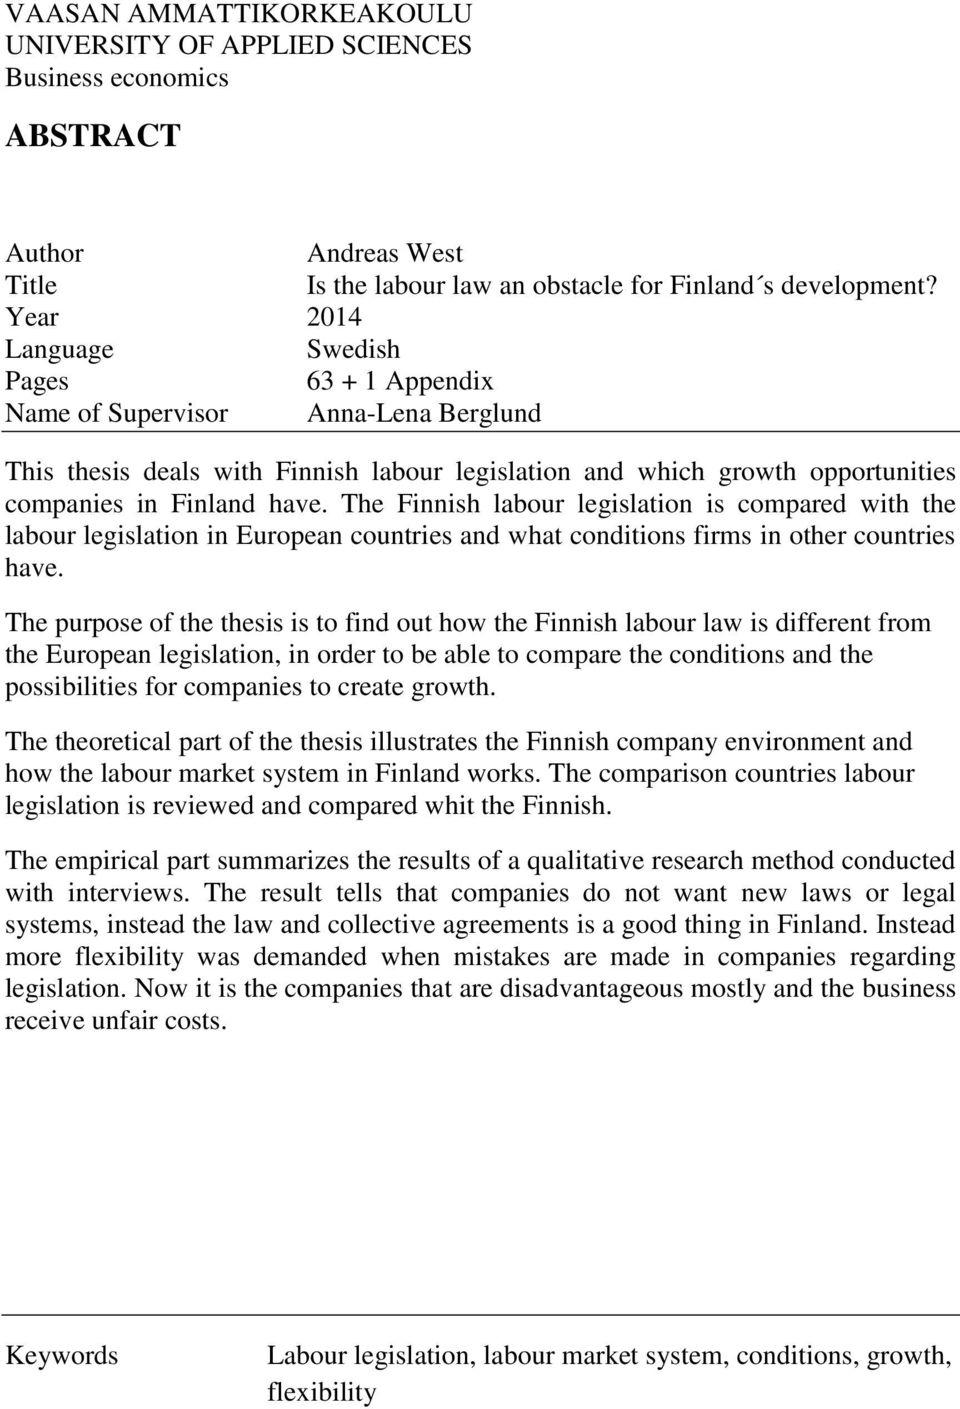 The Finnish labour legislation is compared with the labour legislation in European countries and what conditions firms in other countries have.